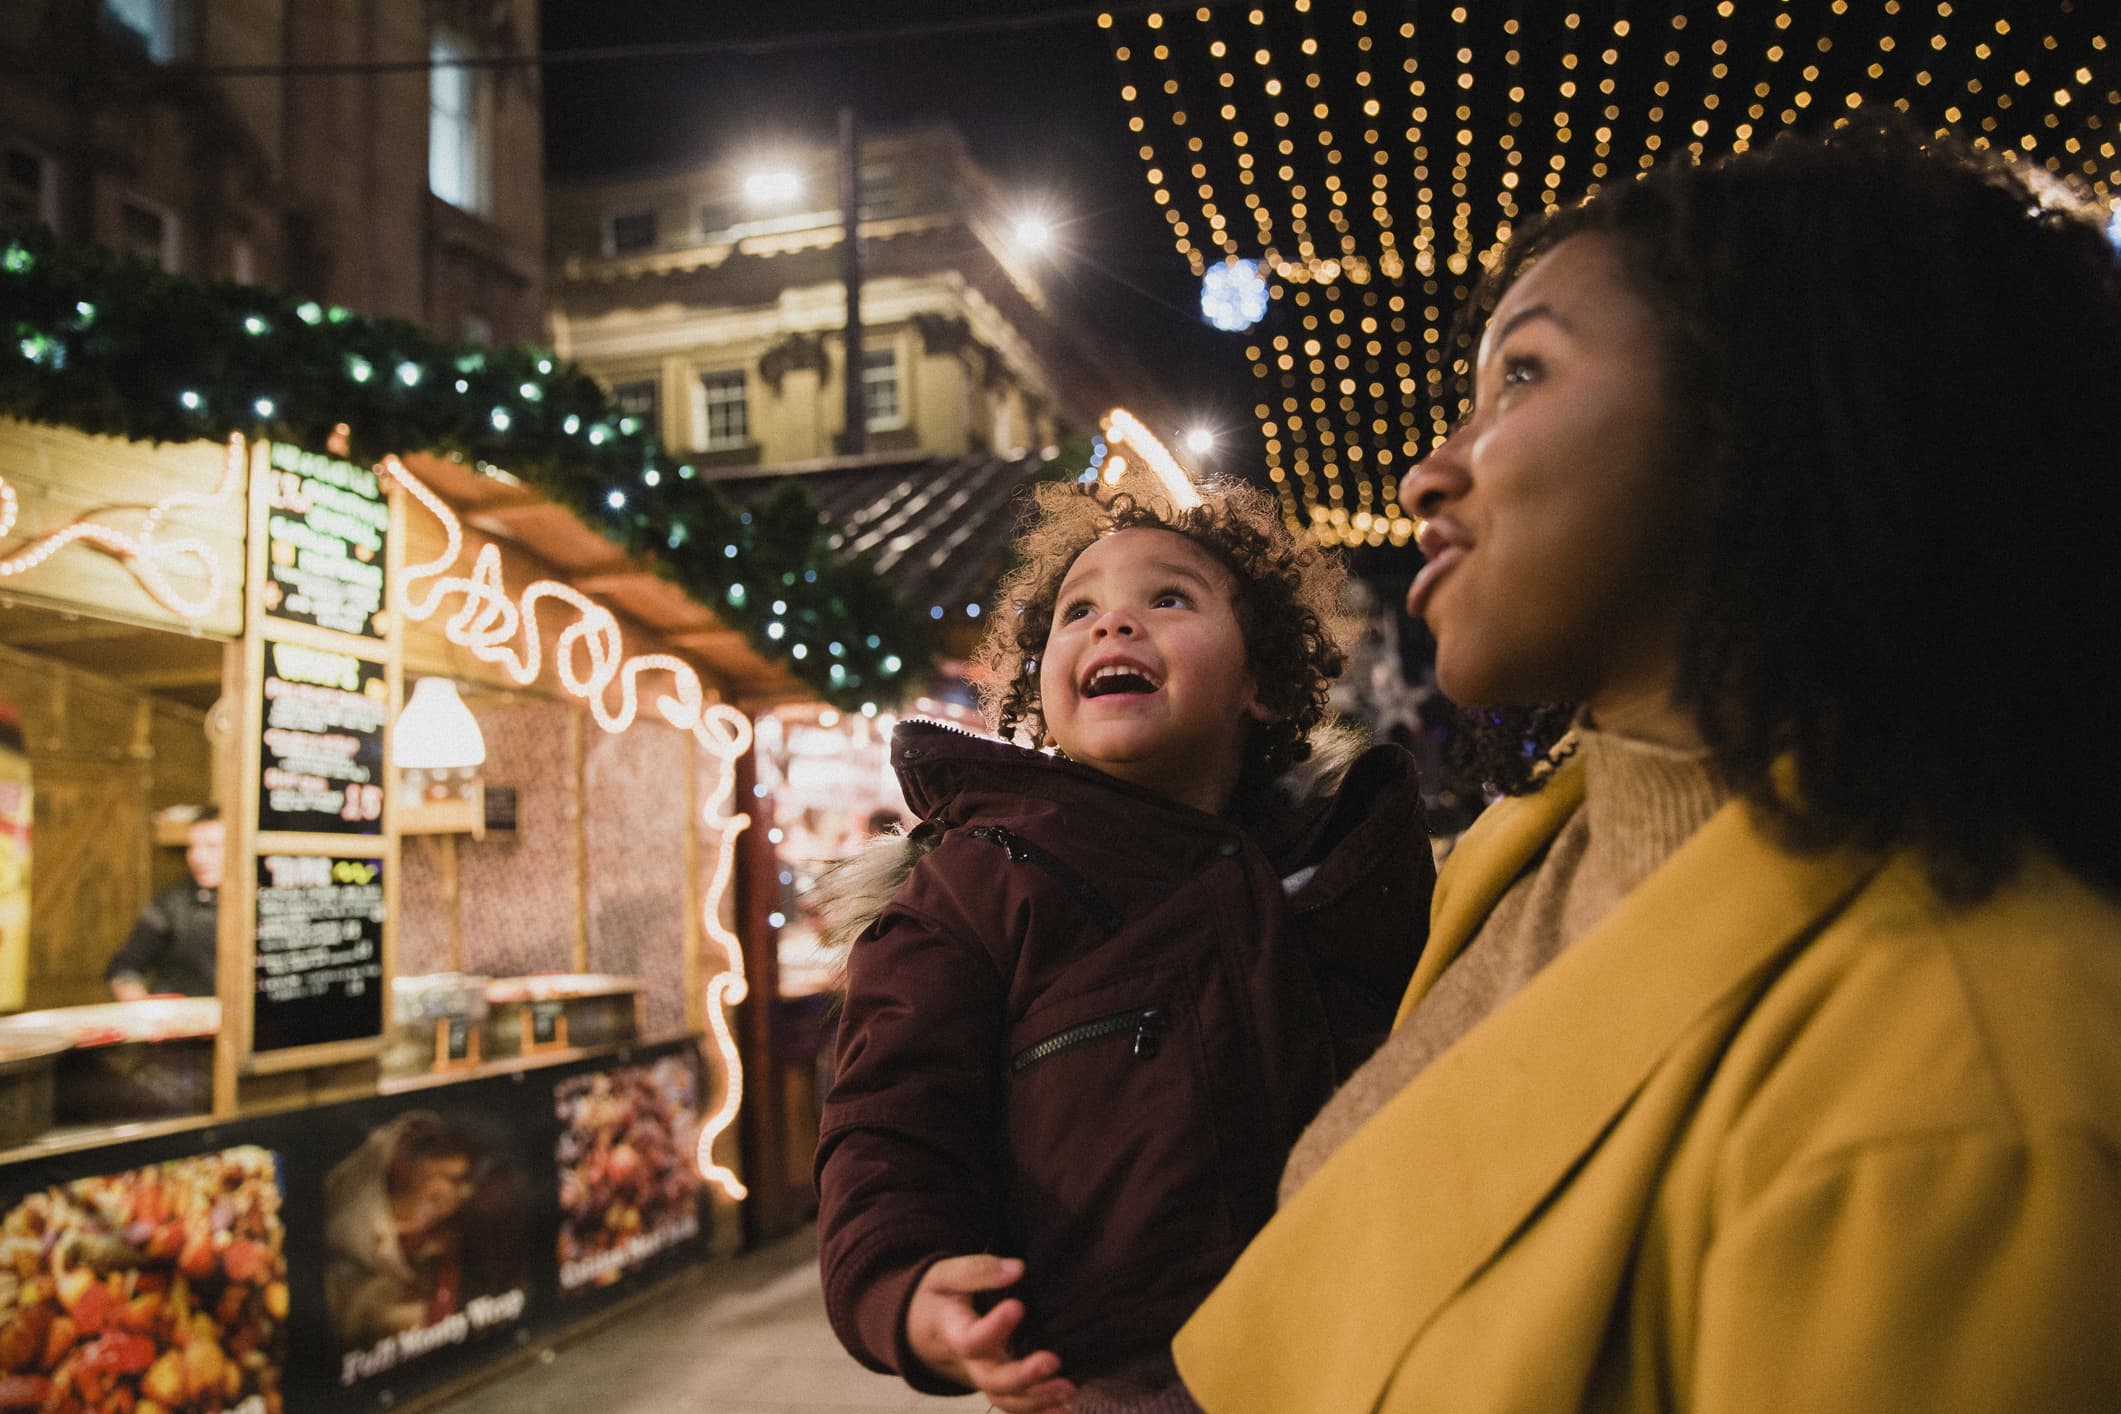 A close-up side-view shot of a woman holding her young daughter, they are both looking at bright​ Christmas lights at the Christmas markets on a cold night, the young girl is in awe.